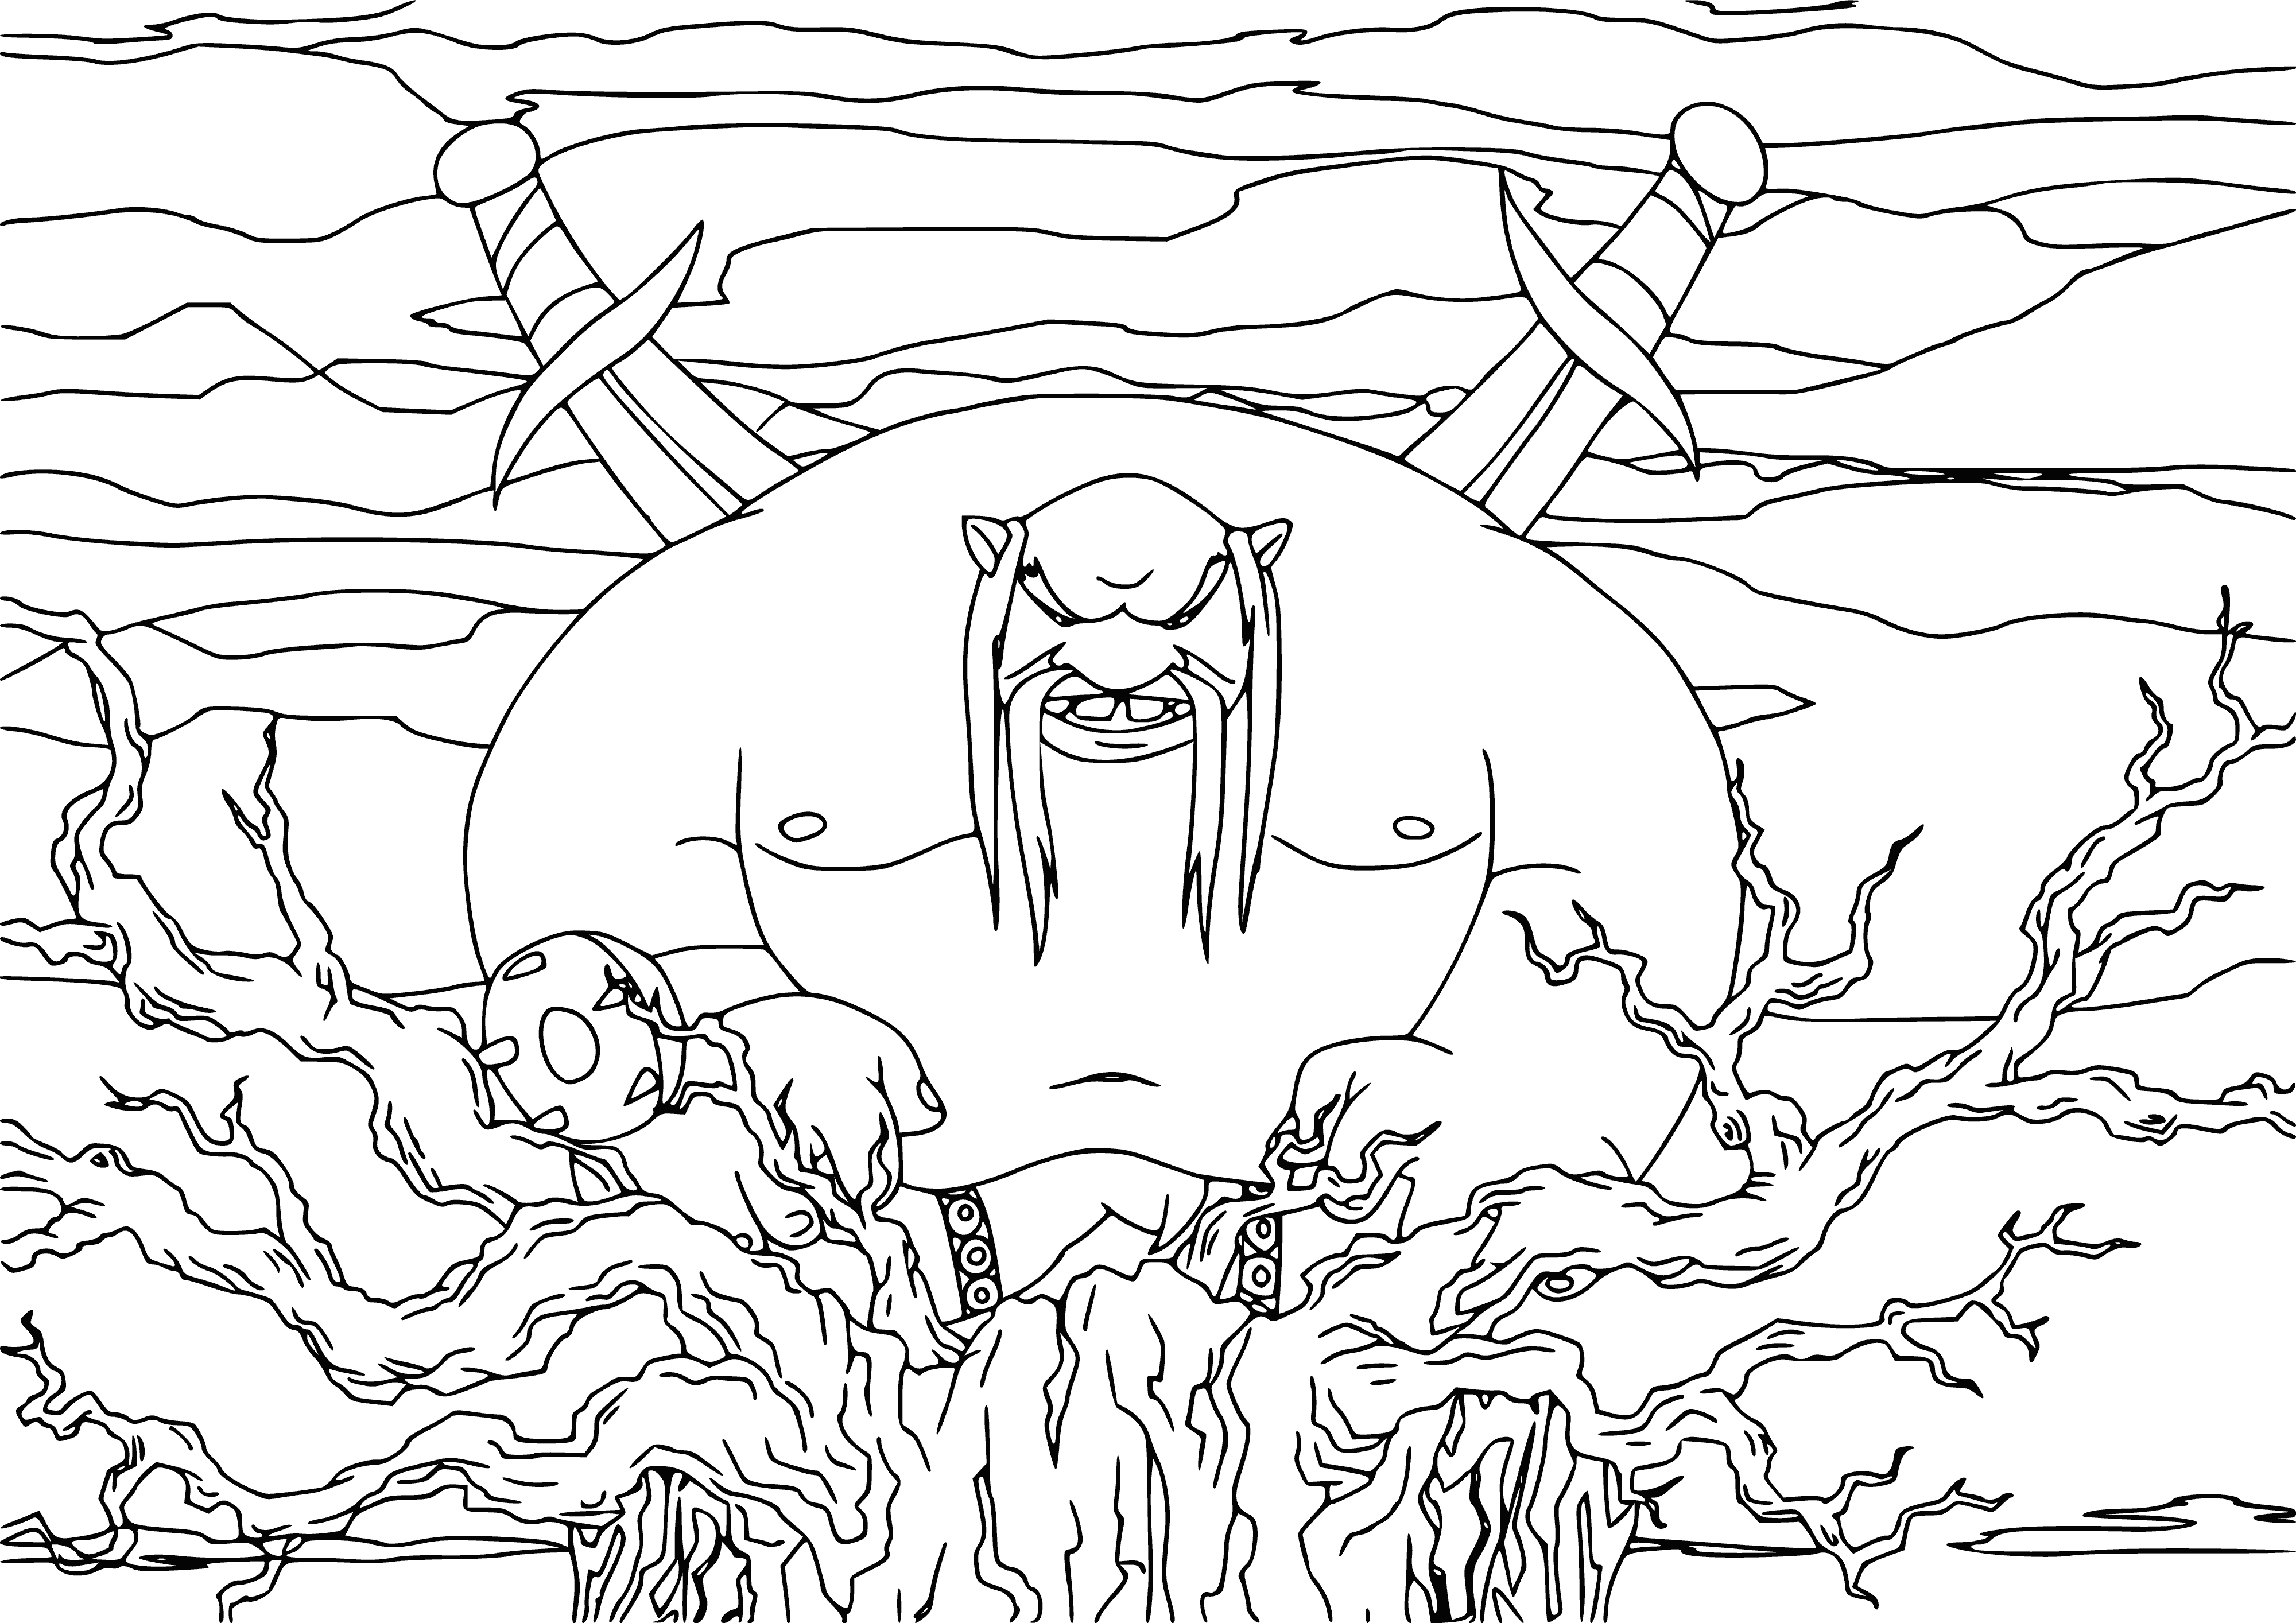 coloring page: Russian man in traditional clothing stands before large, coiled serpent with human head, seemingly hissing.